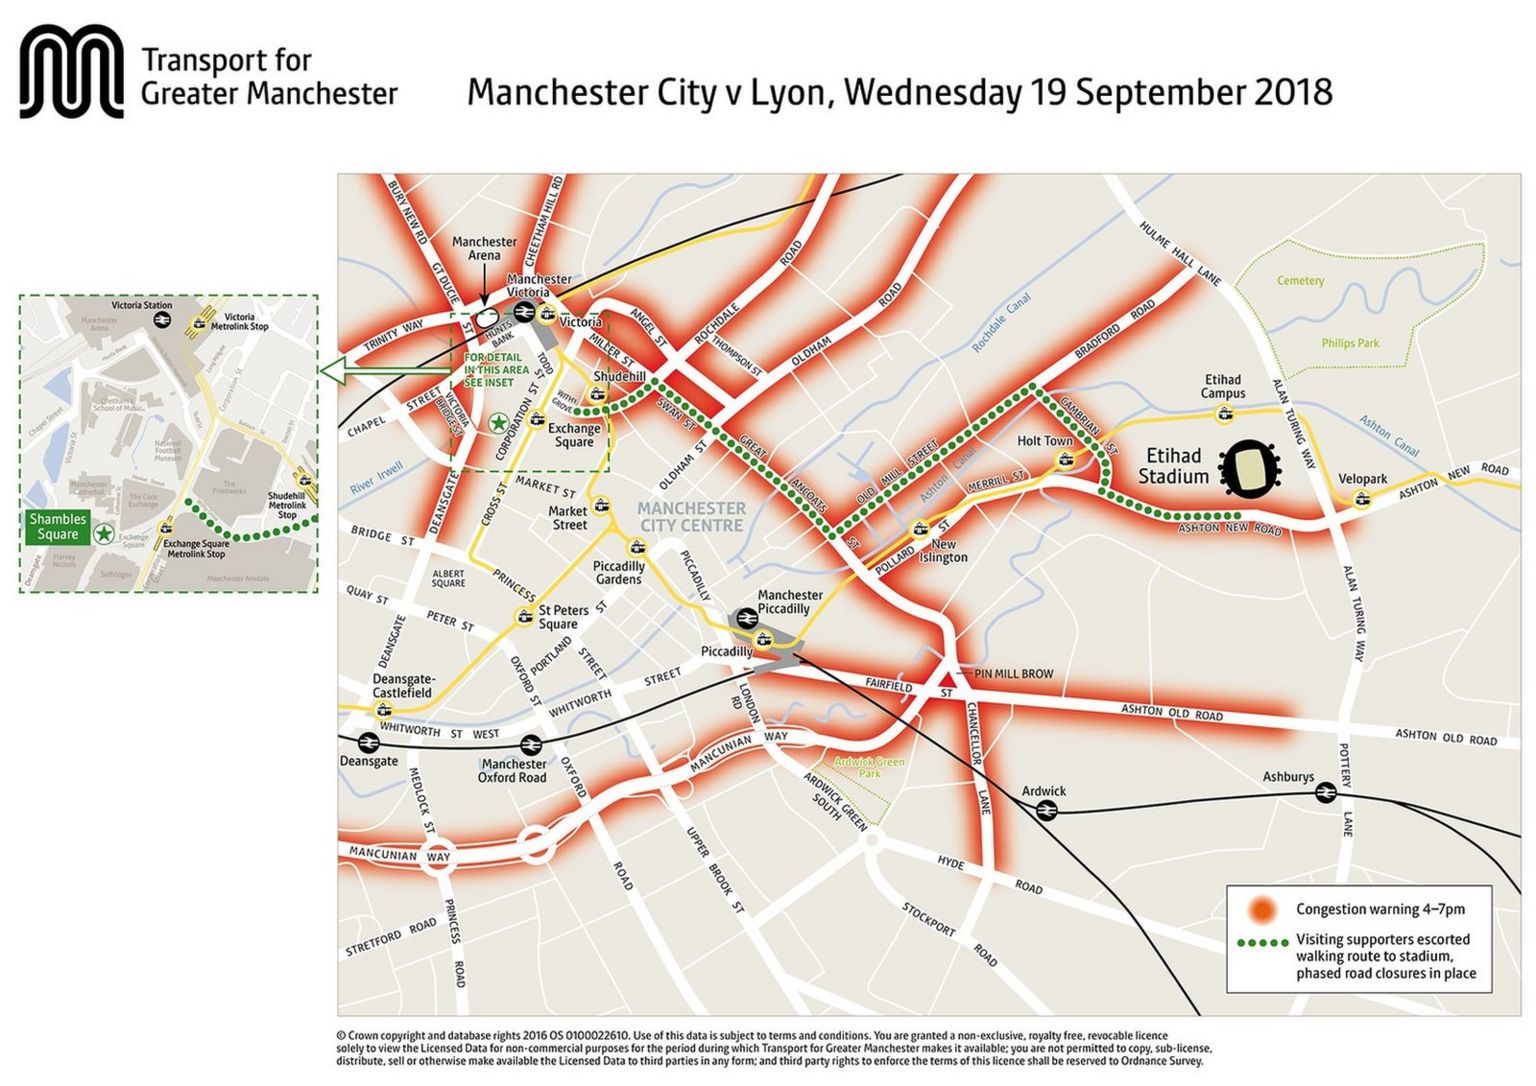 Transport for Greater Manchester disruption map